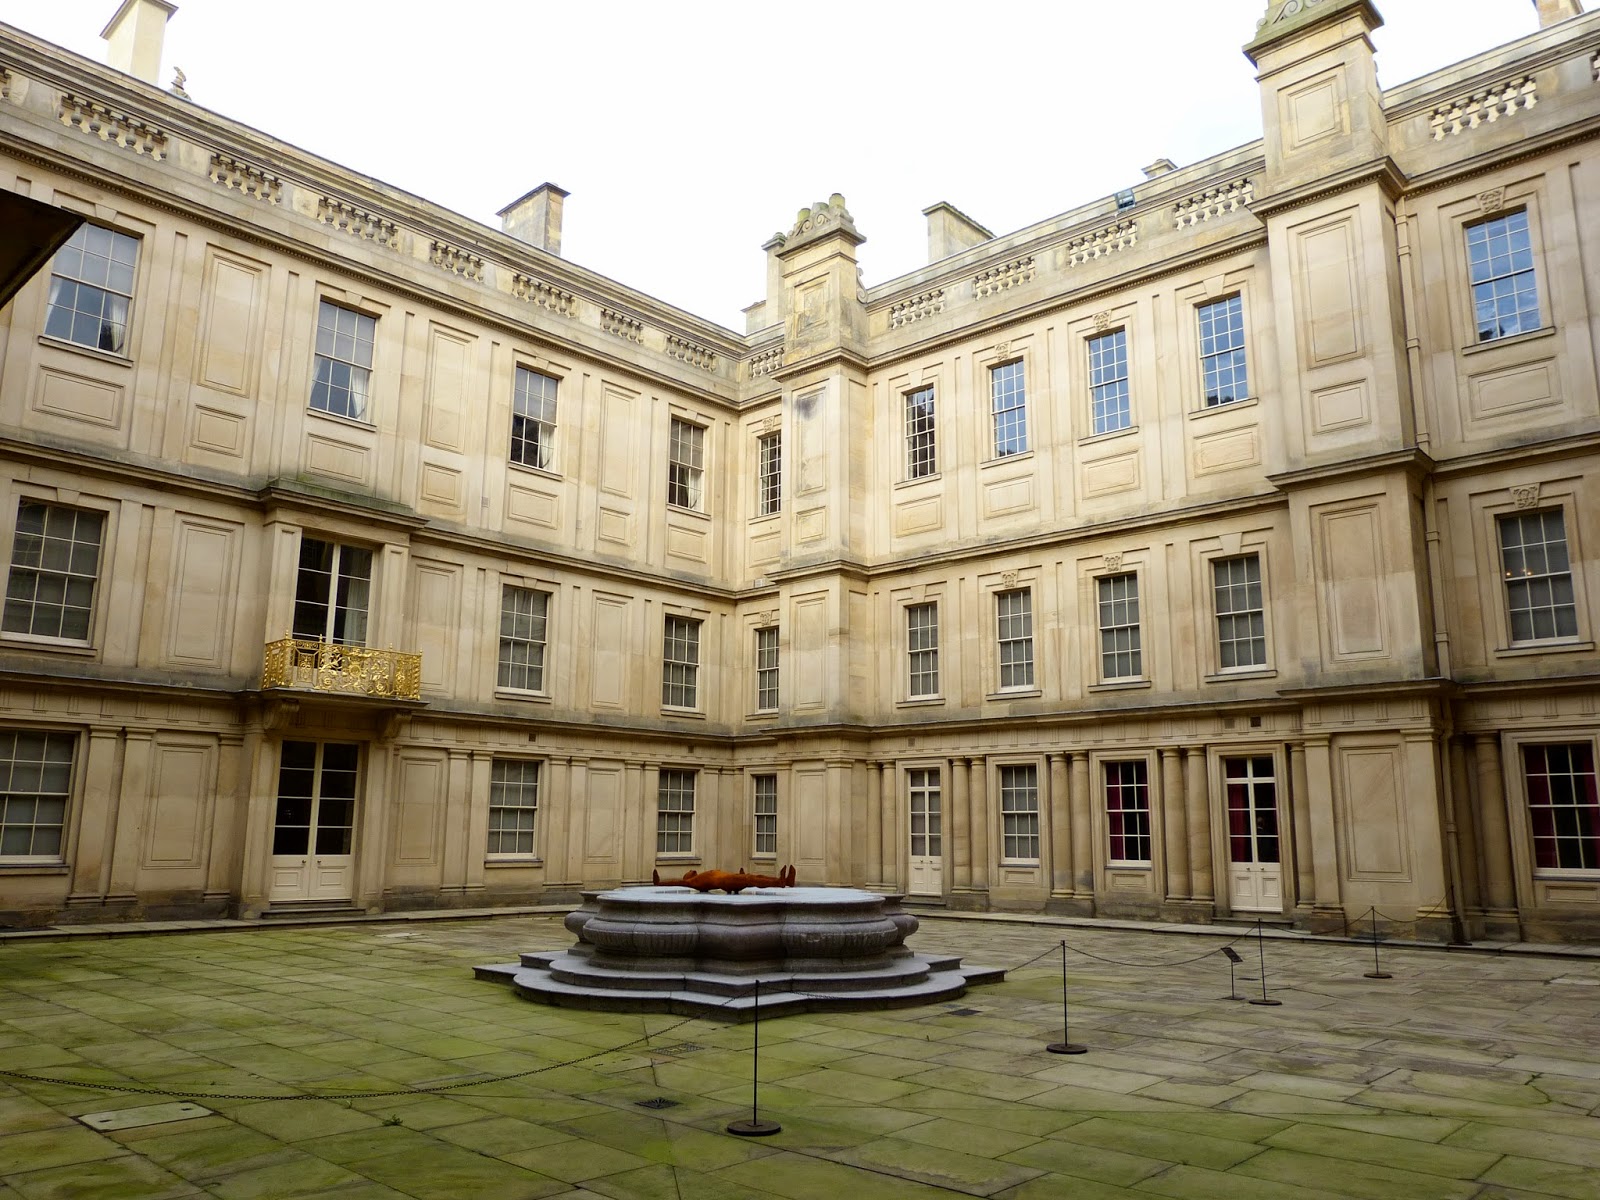 The Courtyard, Chatsworth